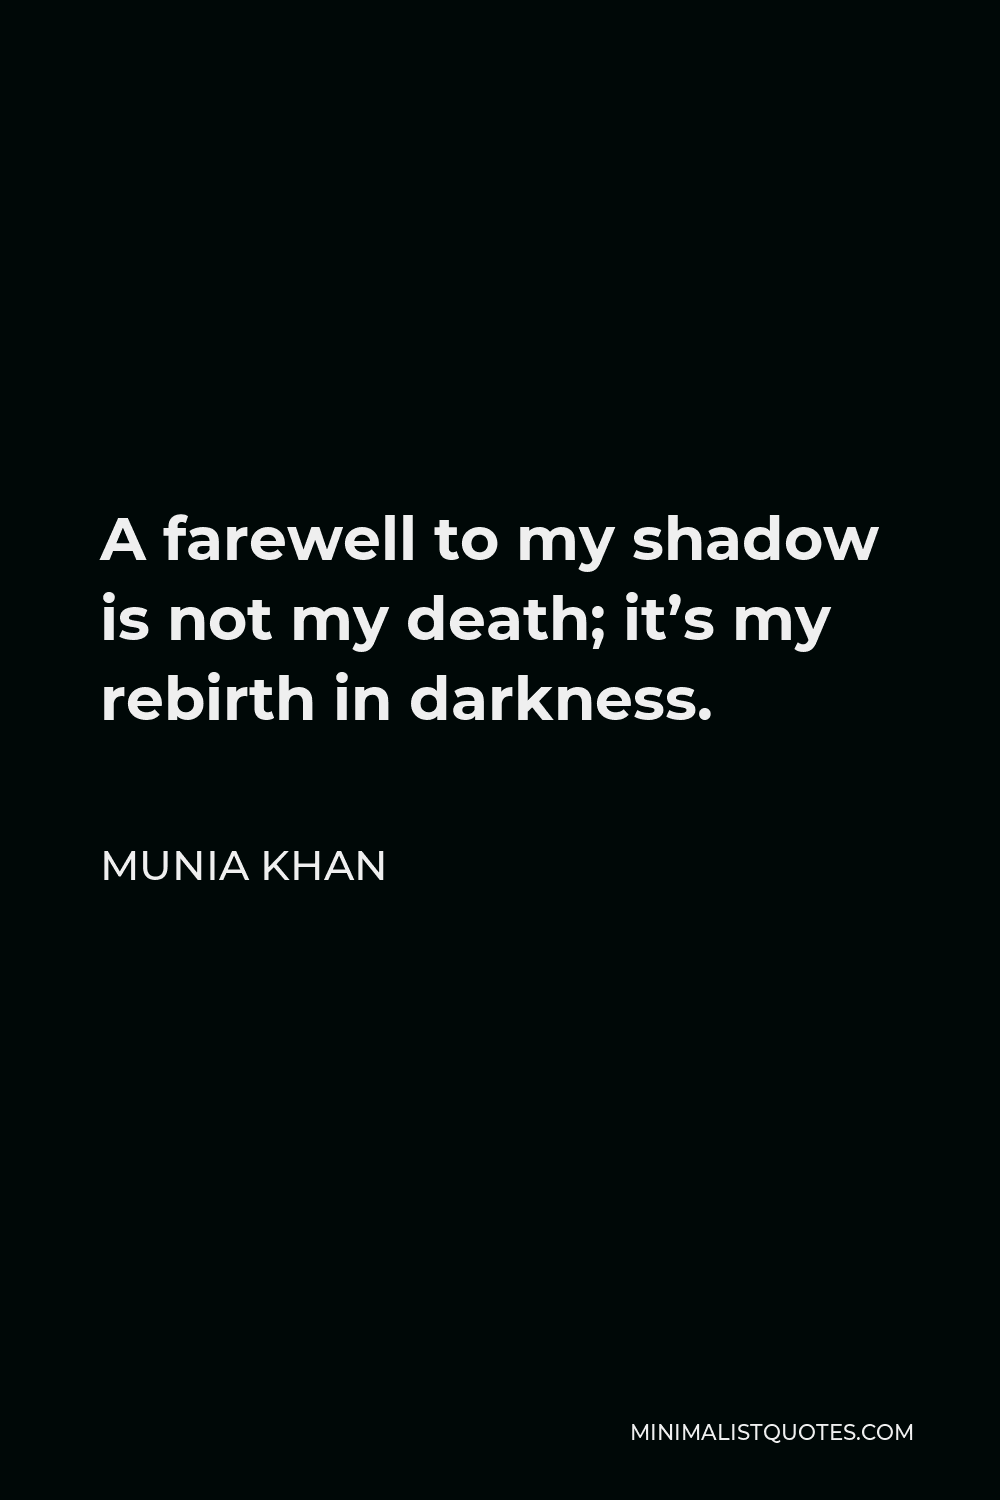 Munia Khan Quote - A farewell to my shadow is not my death; it’s my rebirth in darkness.